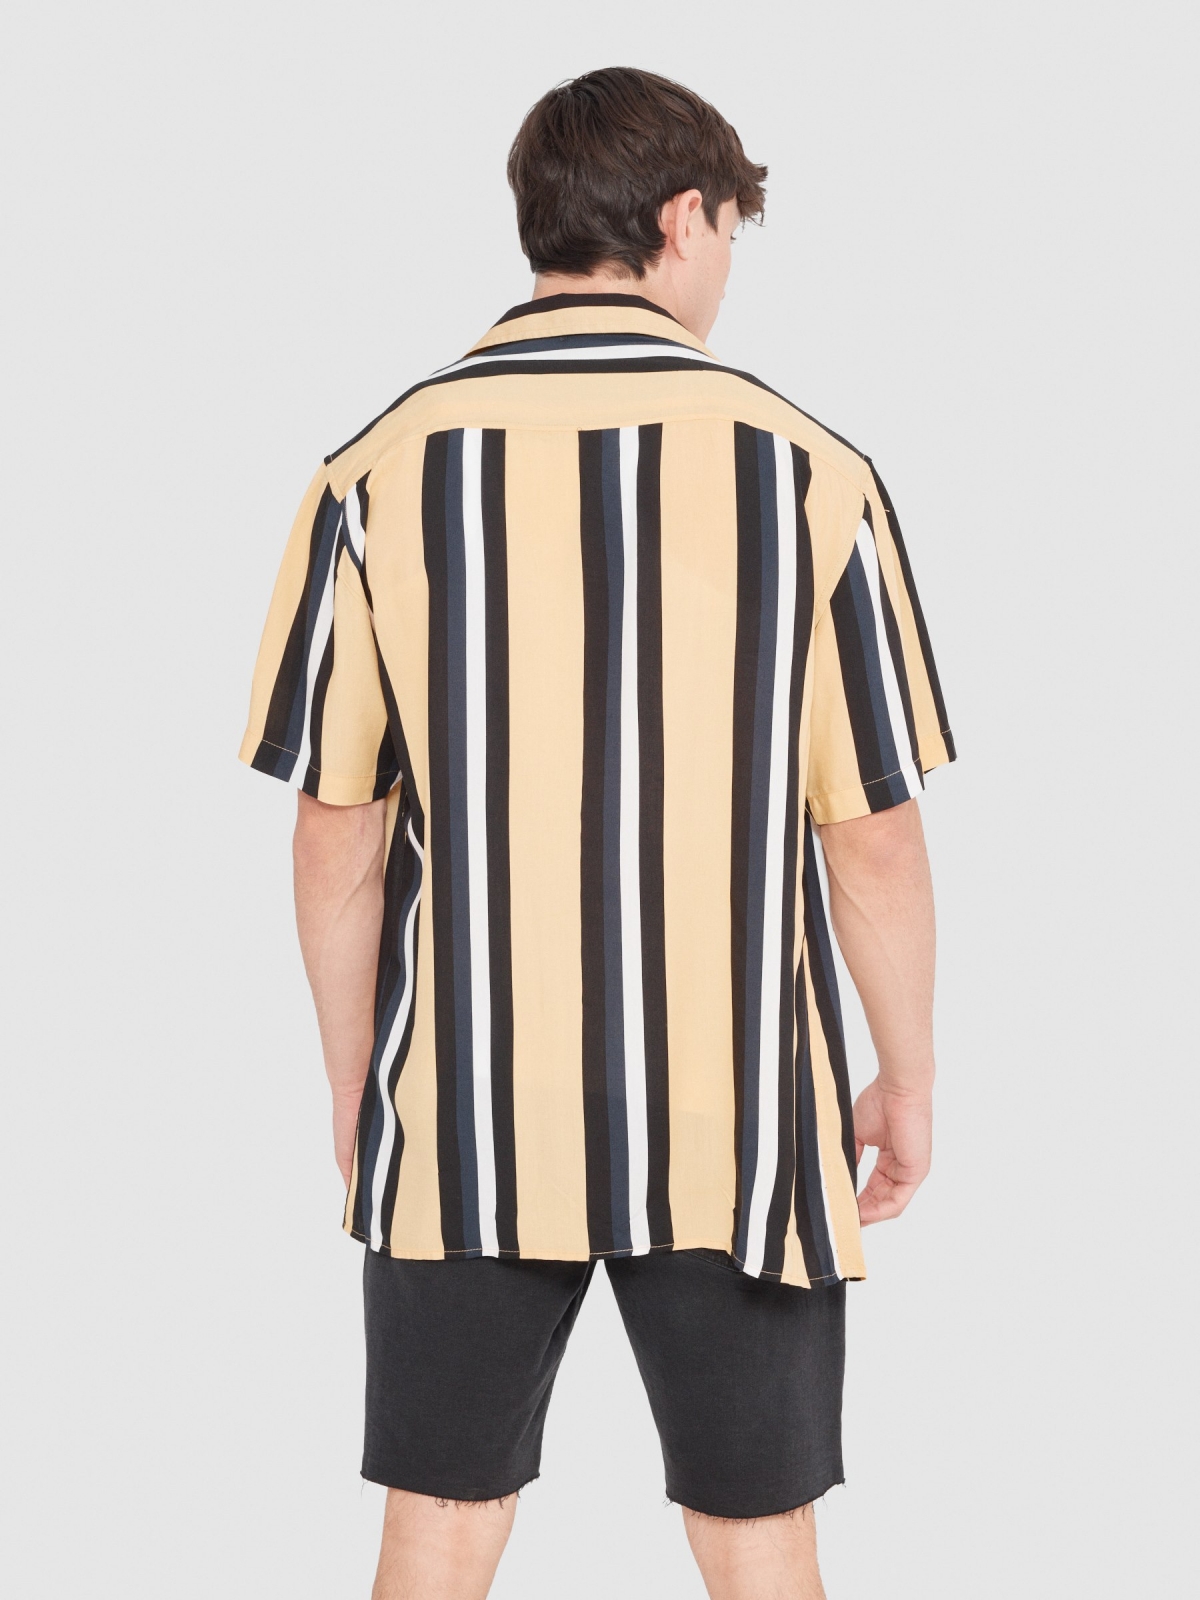 Striped shirt yellow middle back view